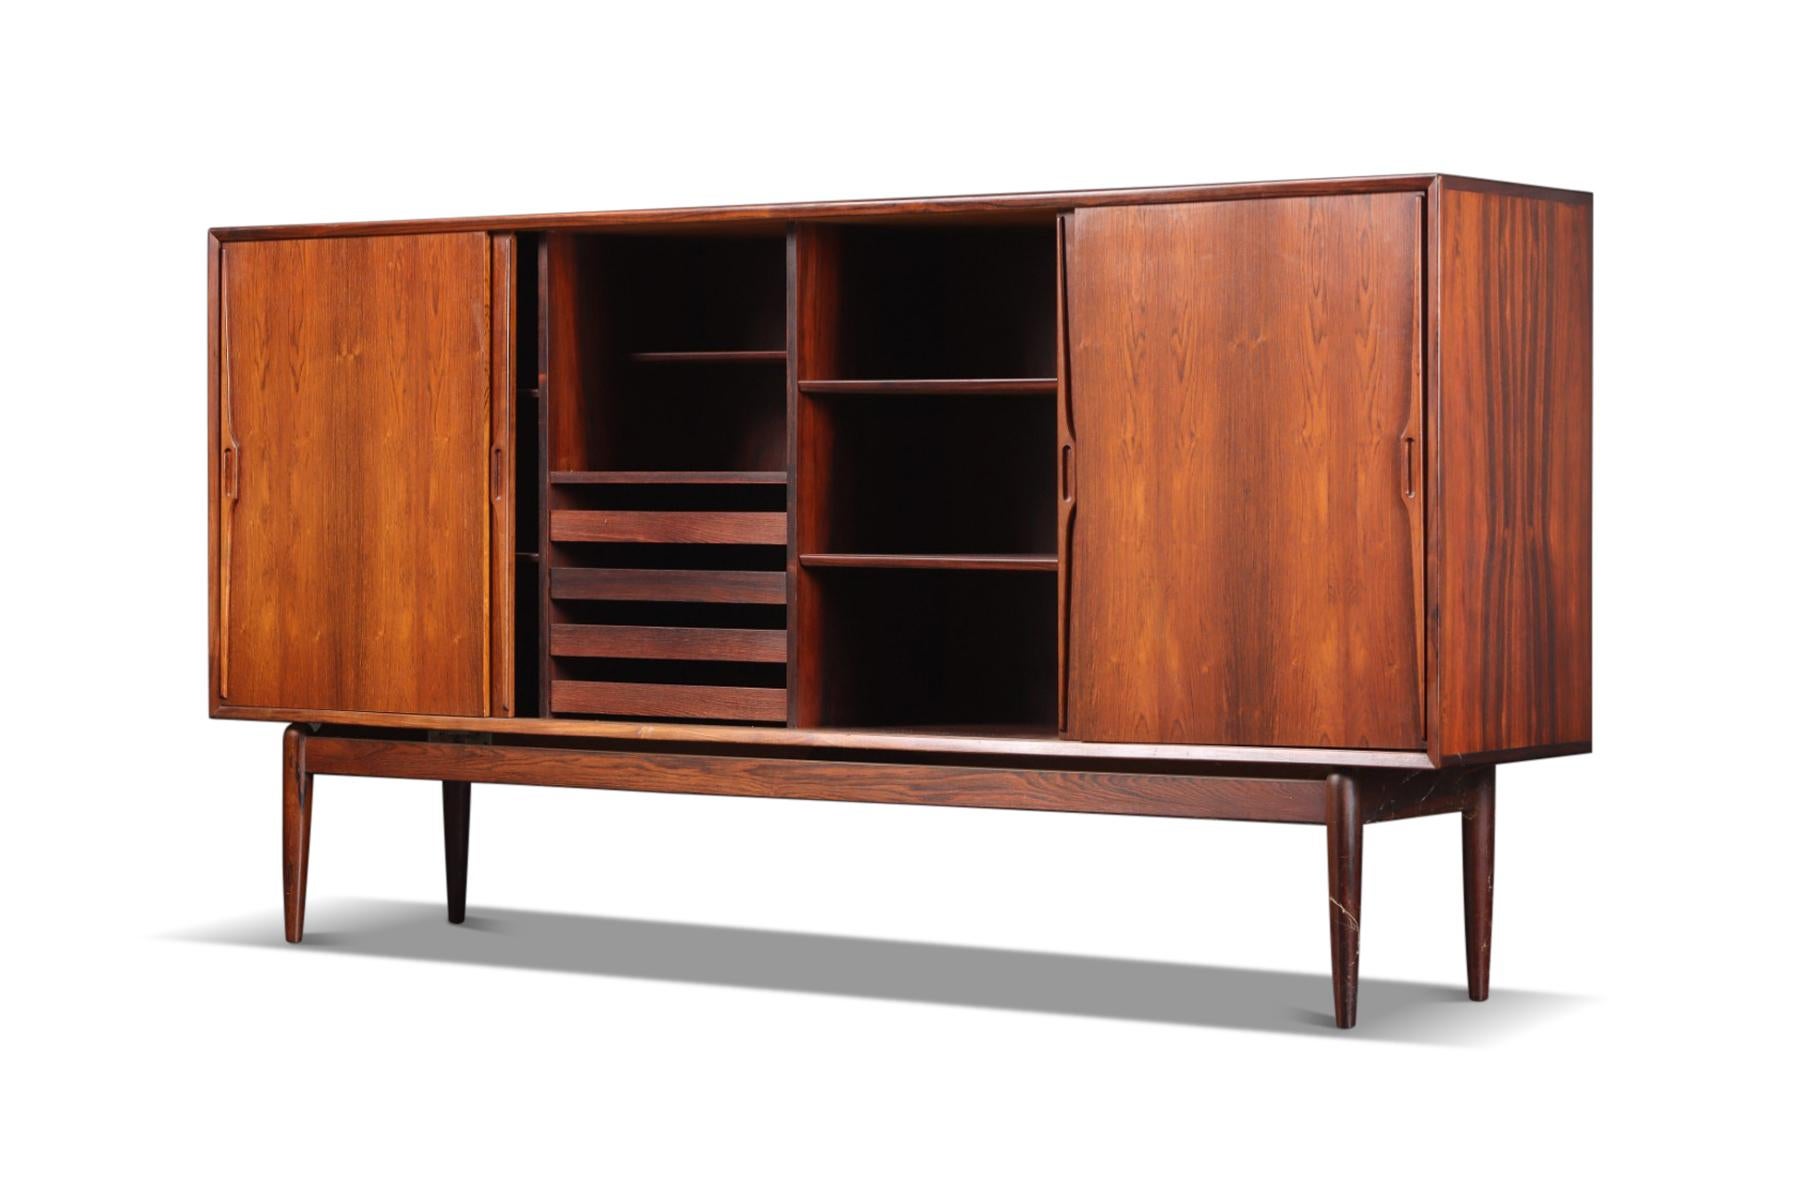 Origin: Denmark
Designer: Unknown
Manufacturer: Unknown
Era: 1960s
Materials: Rosewood
Measurements: 86.75? wide x 17.75? deep x 44.5? tall

Condition: In excellent original condition with typical wear for their vintage.